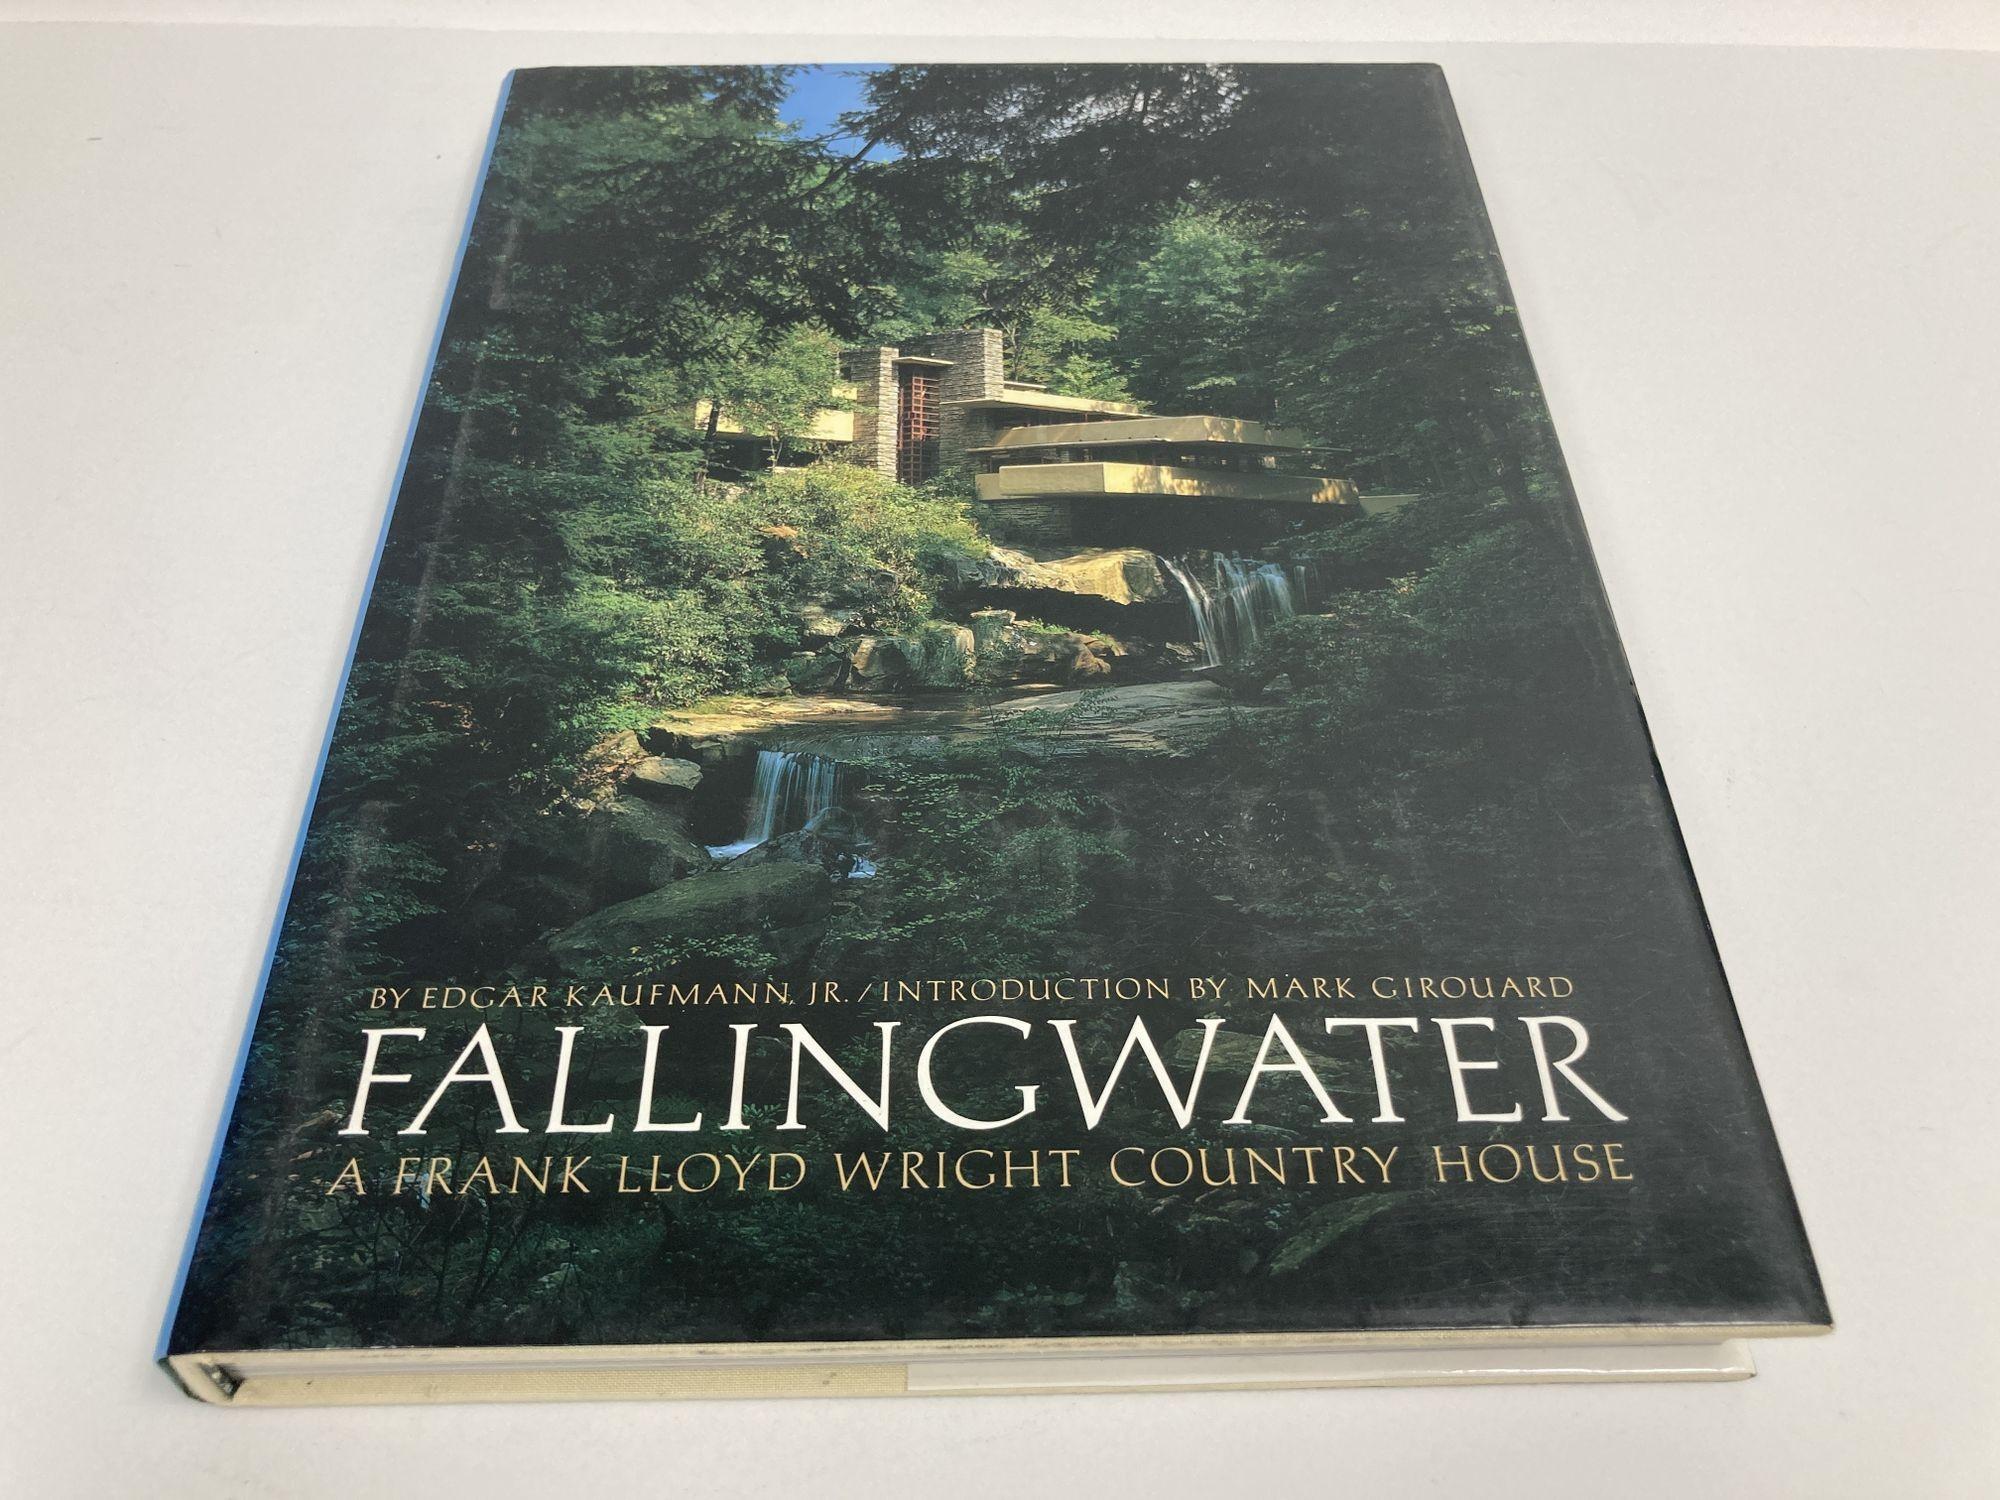 Fallingwater - a Frank Lloyd Wright Country House.
Vintage 1986 1st Edition Modernism Architecture Large Hardcover Book.
DIMENSIONS: 9.75